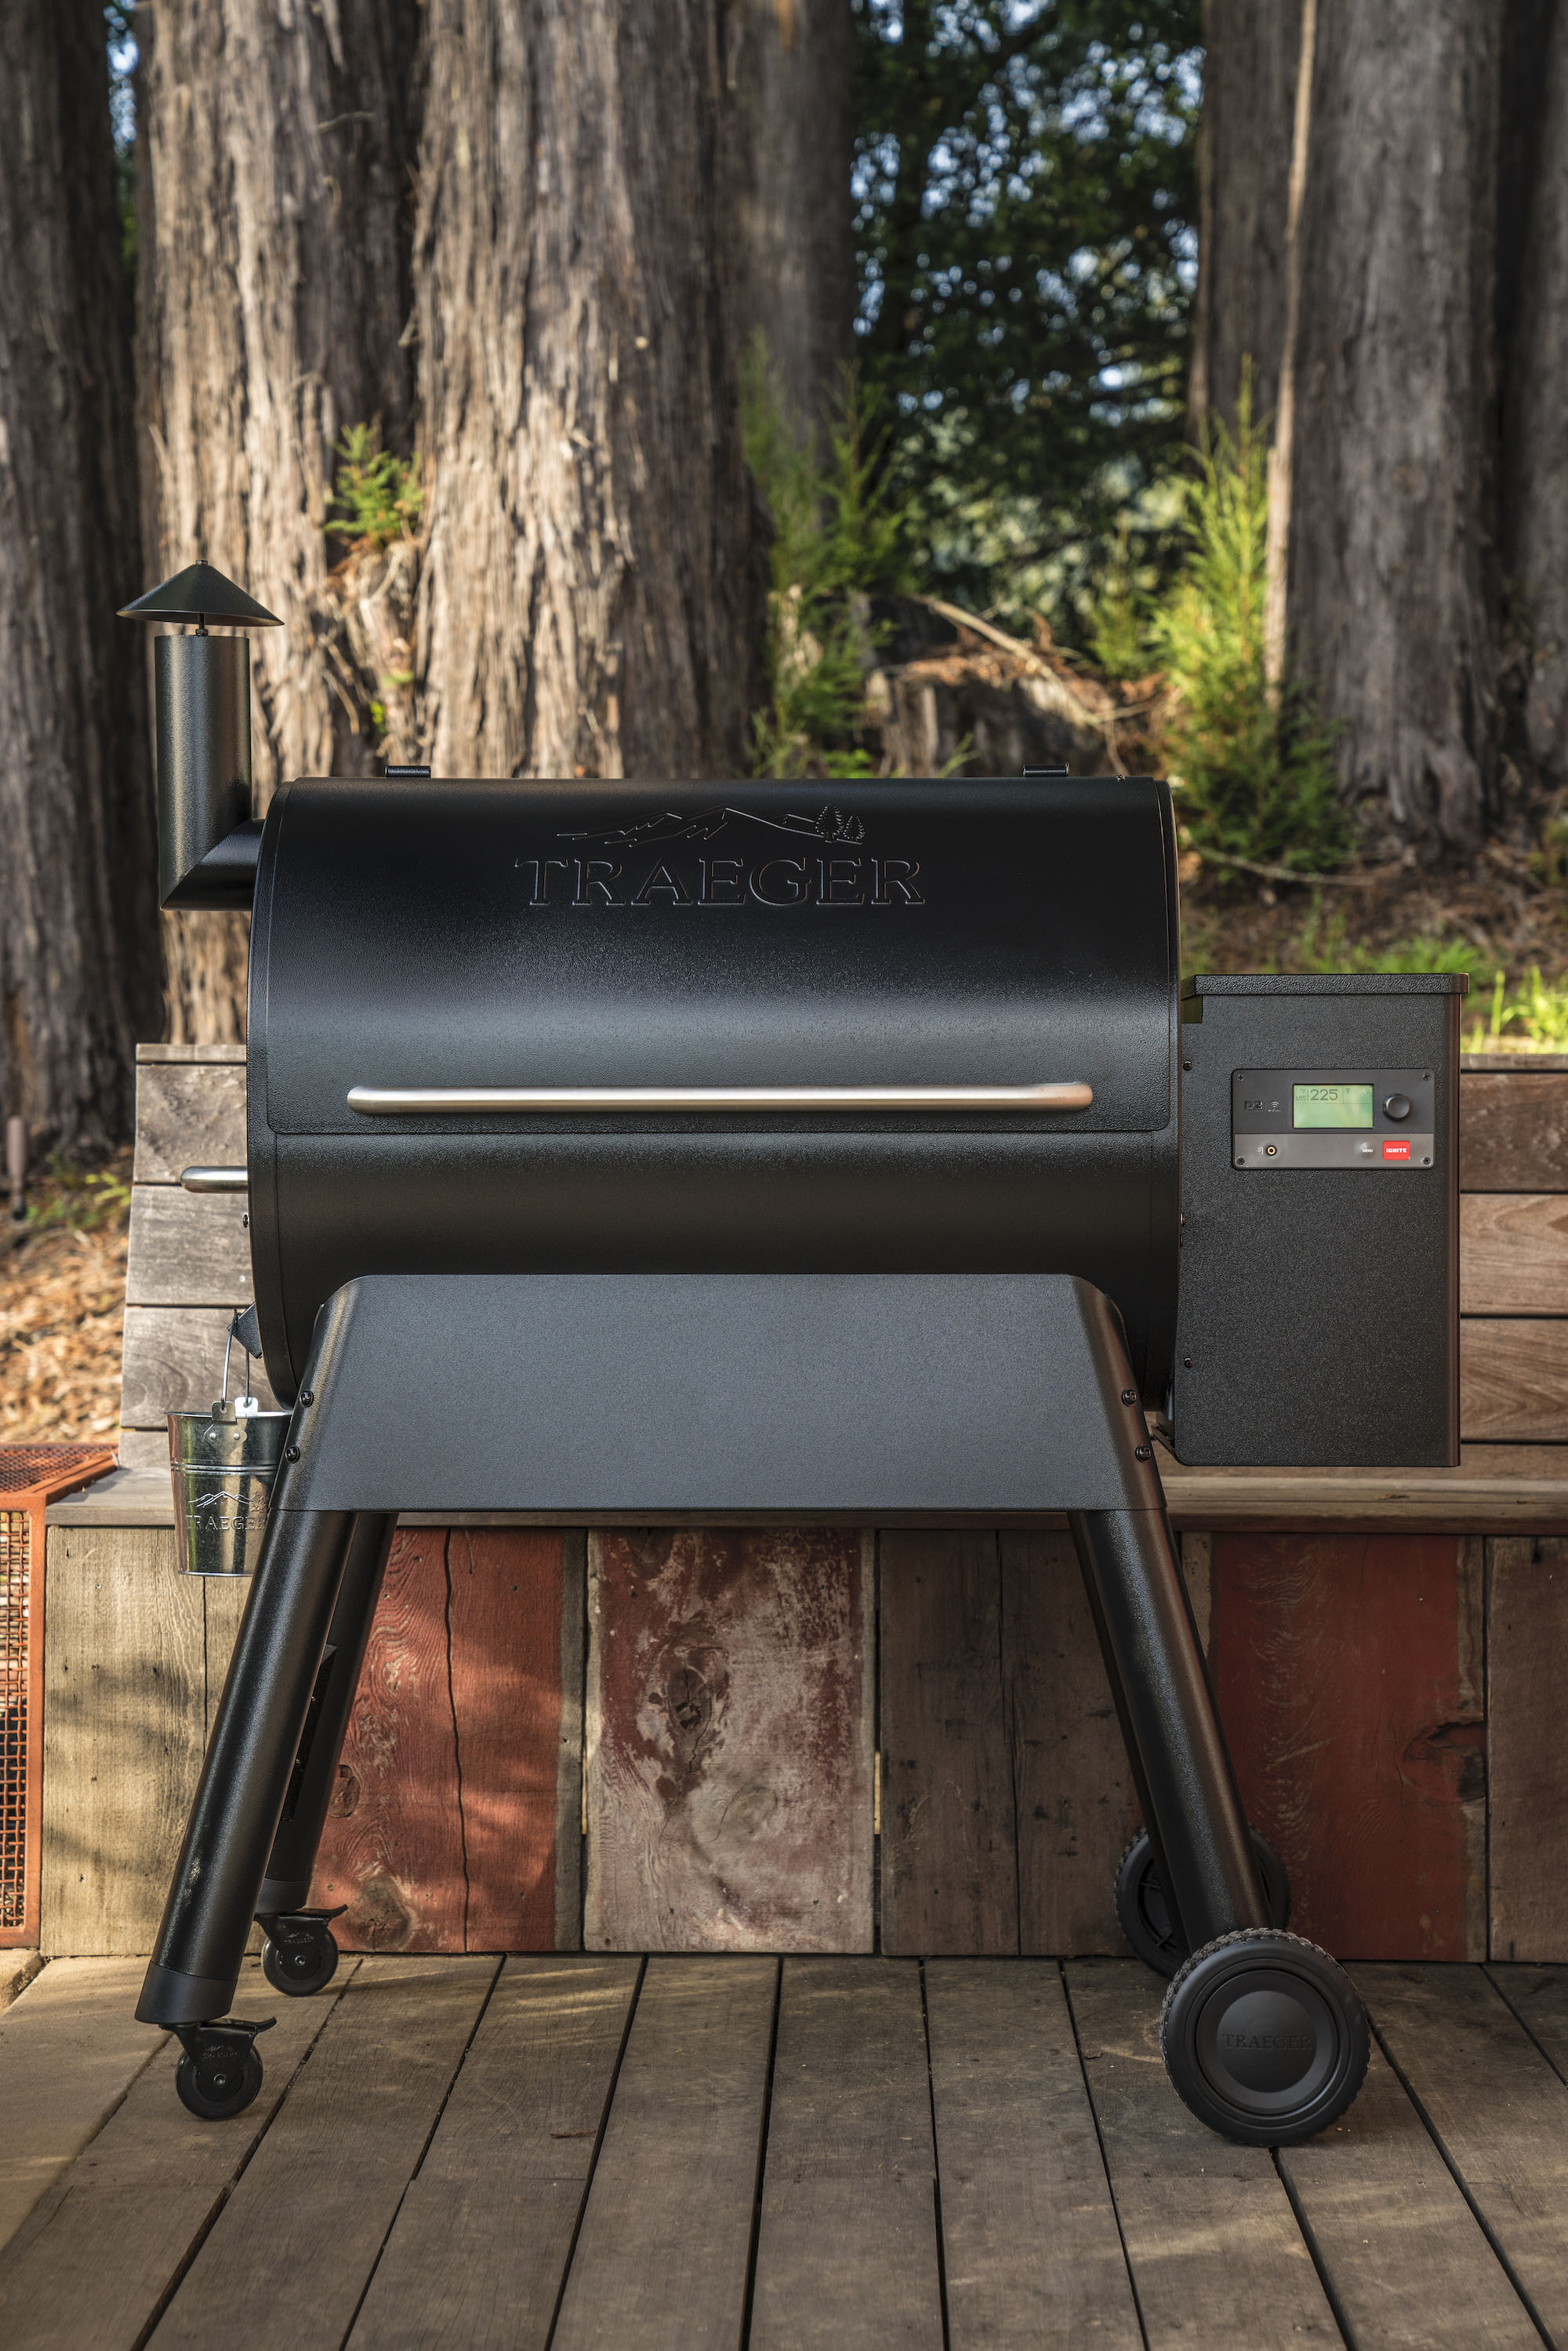 Set Traeger WiFIRE Temperature Probe Alarm: How to use D2 Controller on  wood pellet smoker grill 